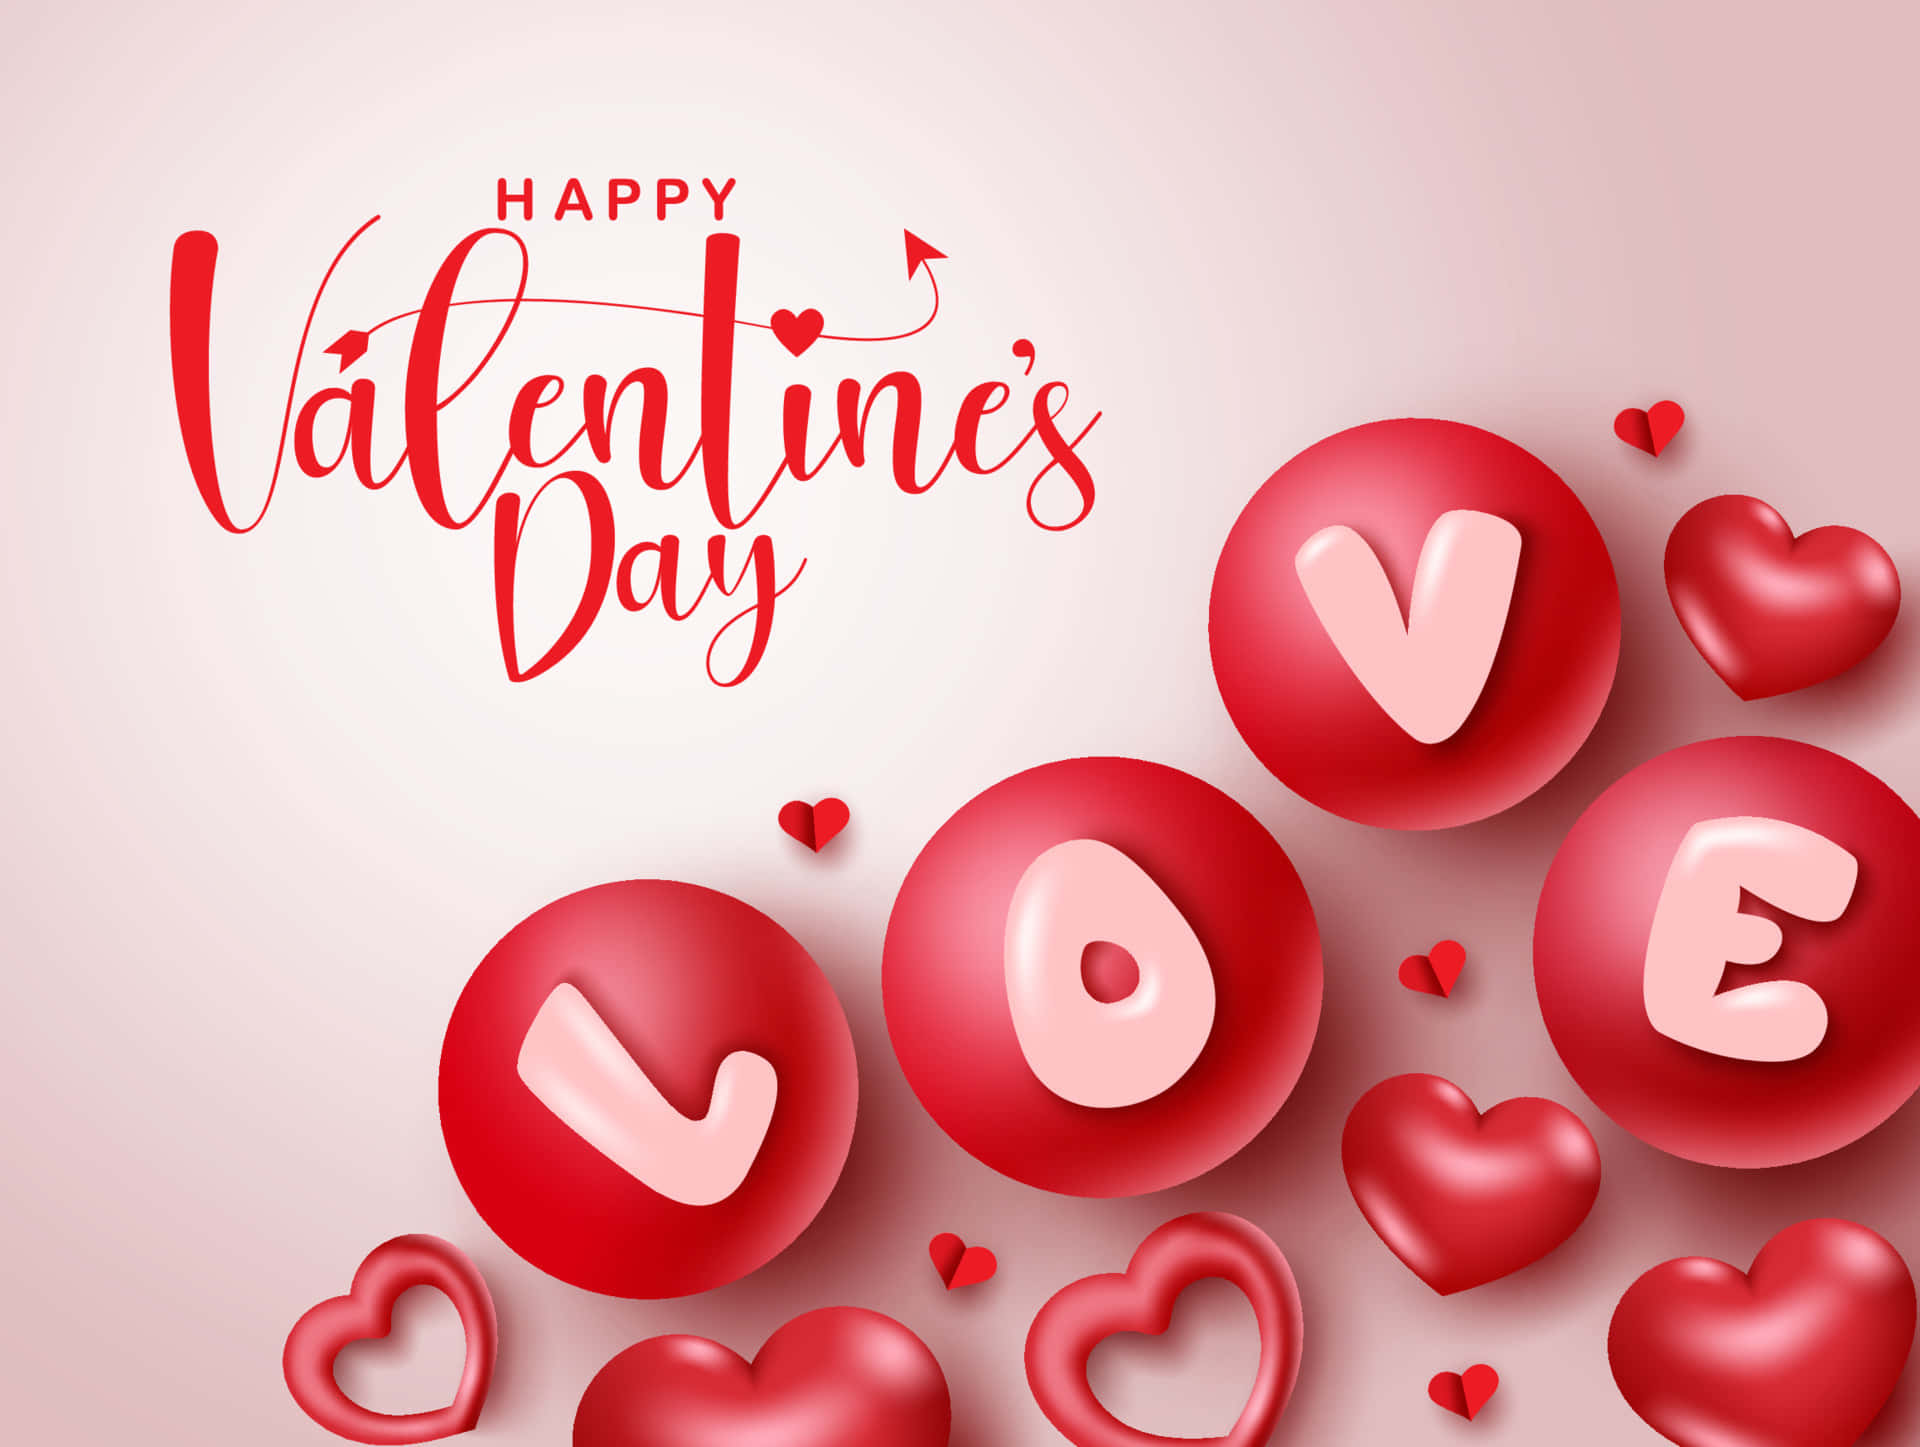 Celebrate Love with a Romantic Happy Valentines Day Background